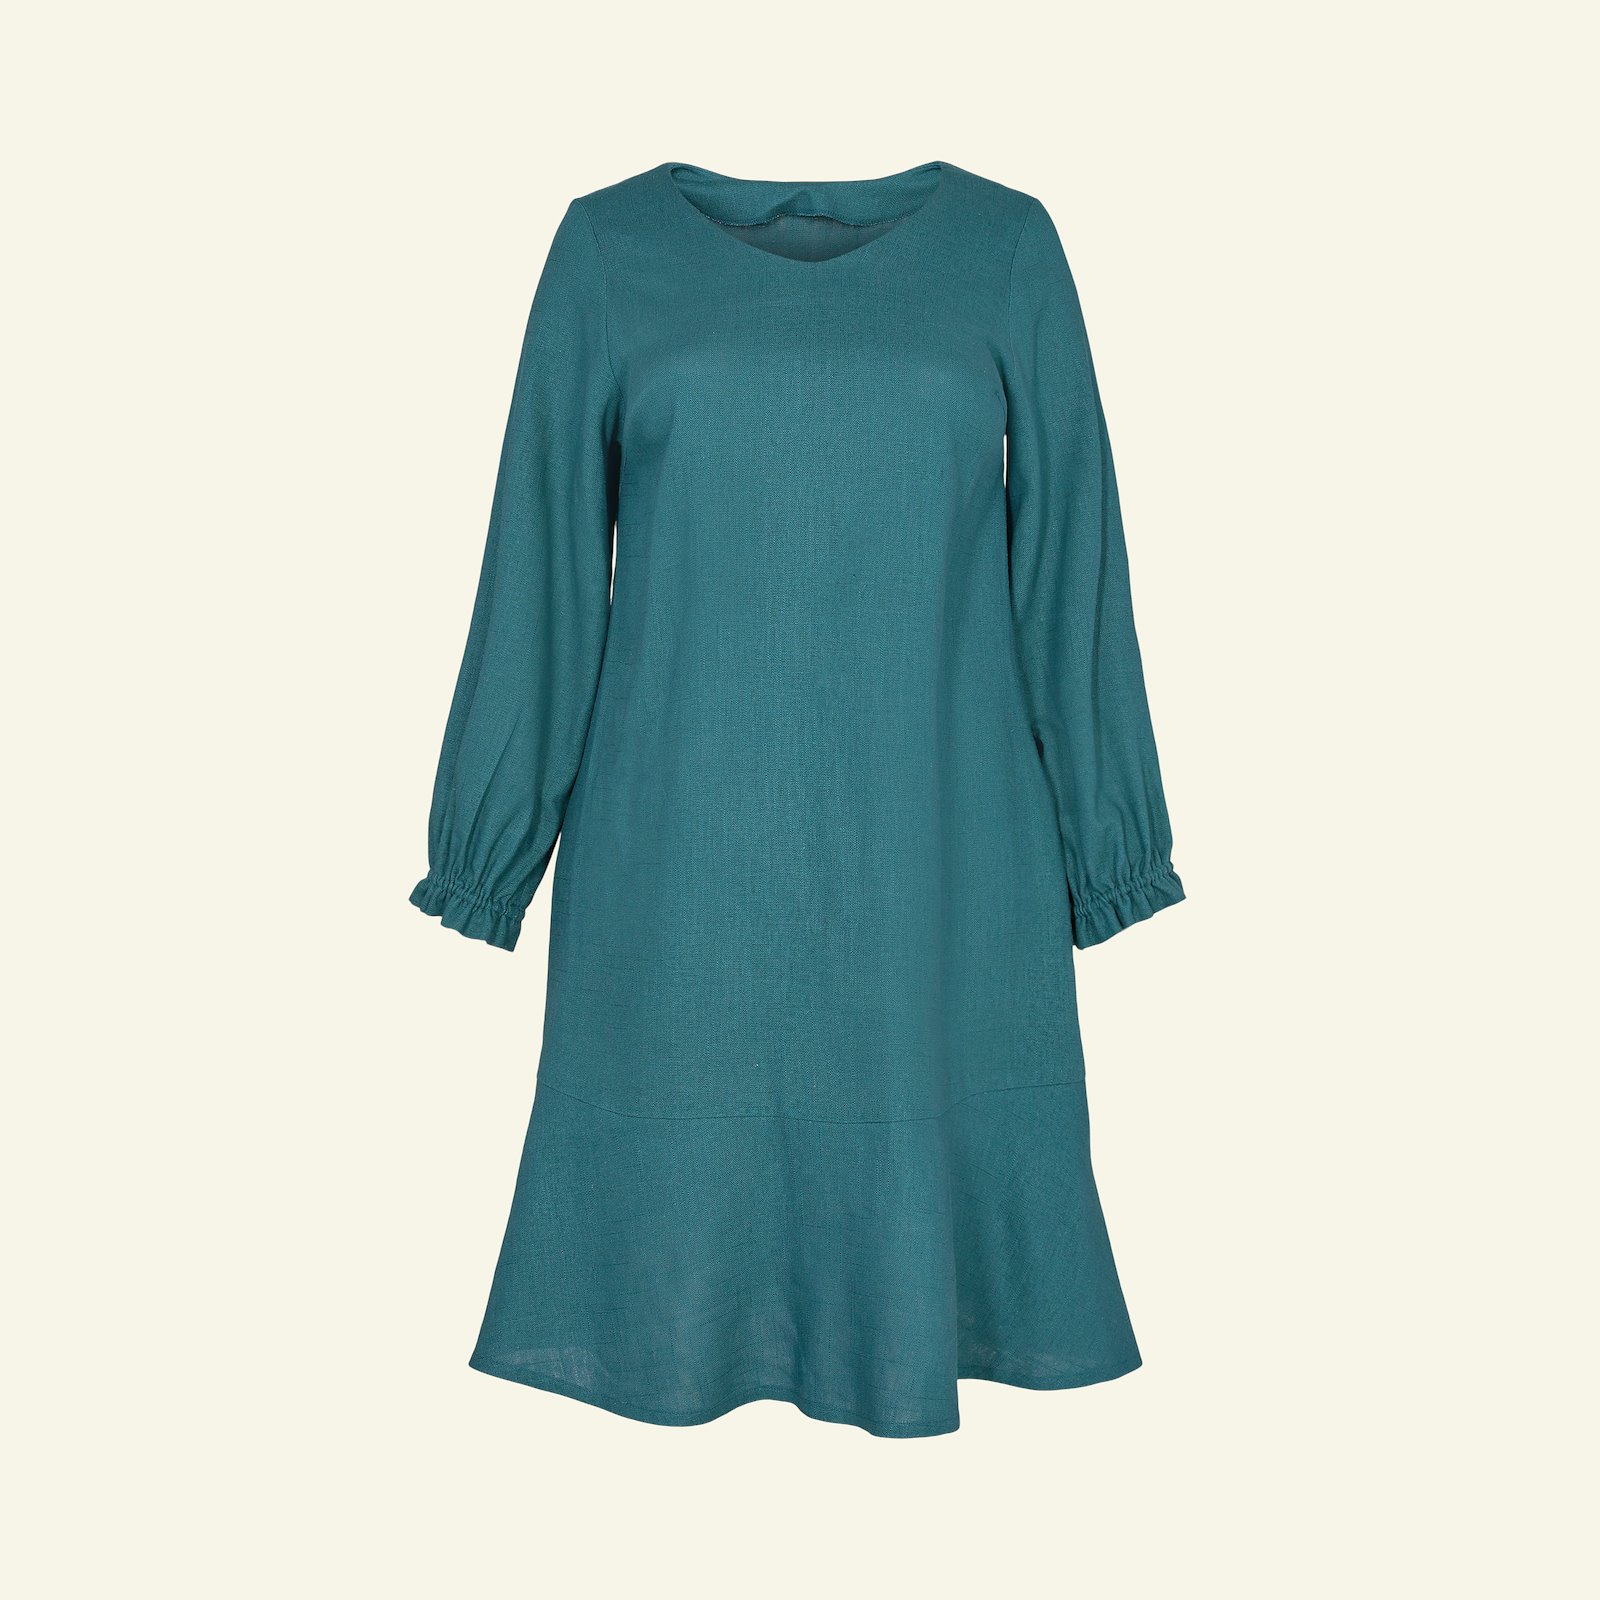 Dress with long and short sleeves, 56/28 p73018_410129_sskit